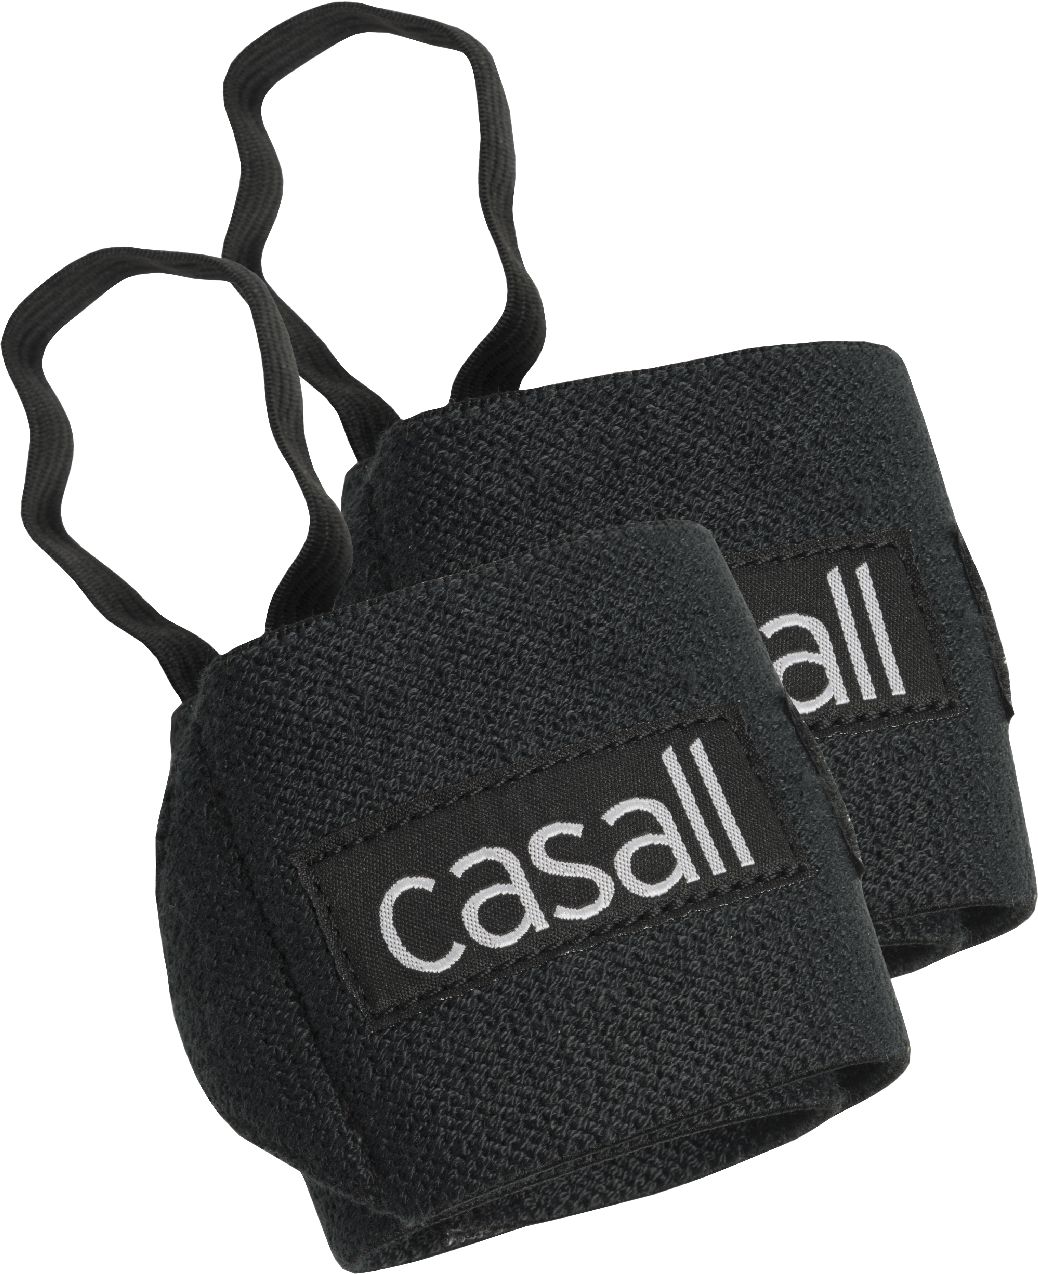 CASALL, WRIST SUPPORTS